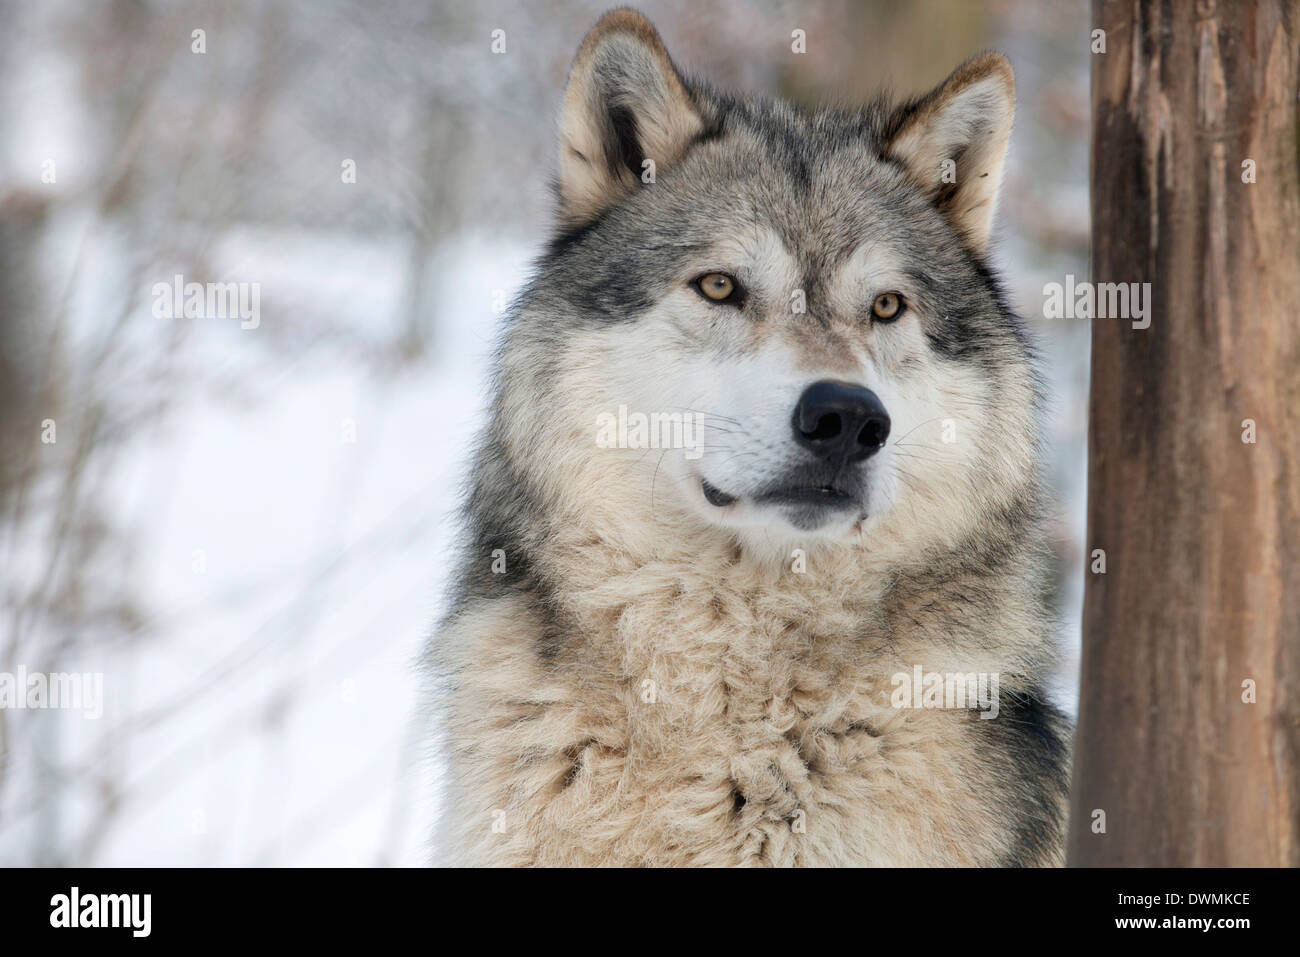 North American timber wolf (Canis lupus) in forest, Wolf Science Centre, Ernstbrunn, Austria, Europe Stock Photo